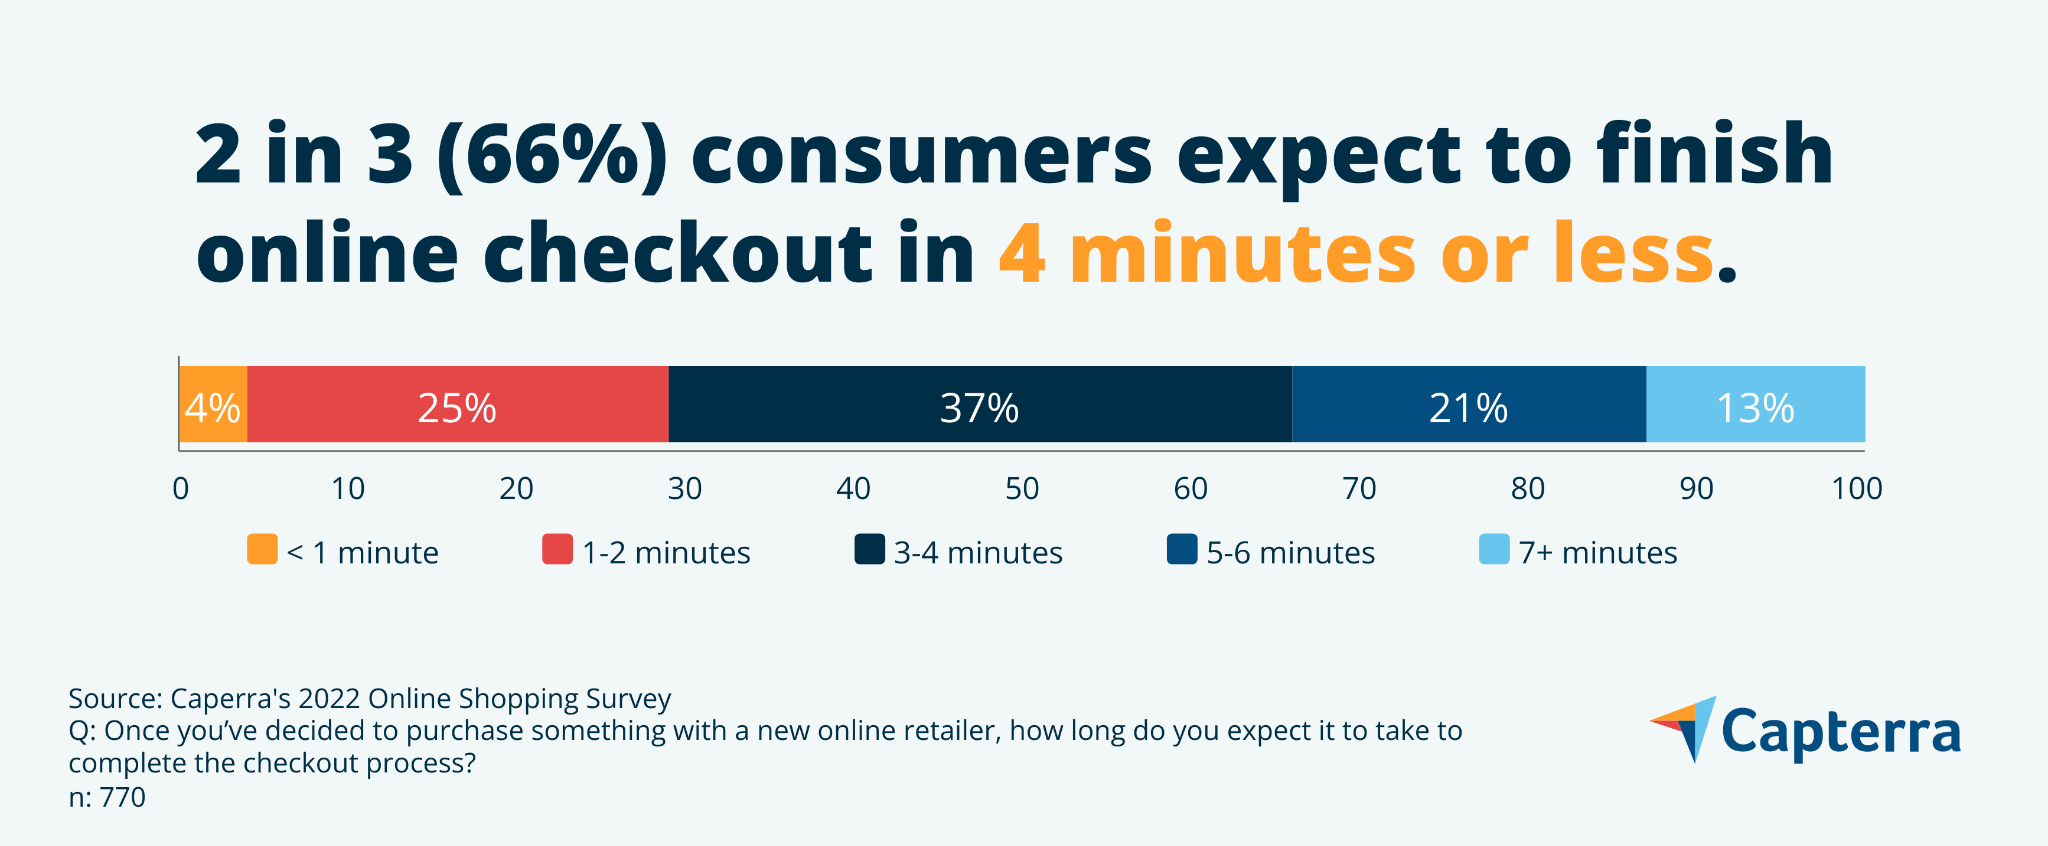 Your Online Checkout Process Should Take 4 Minutes or Less